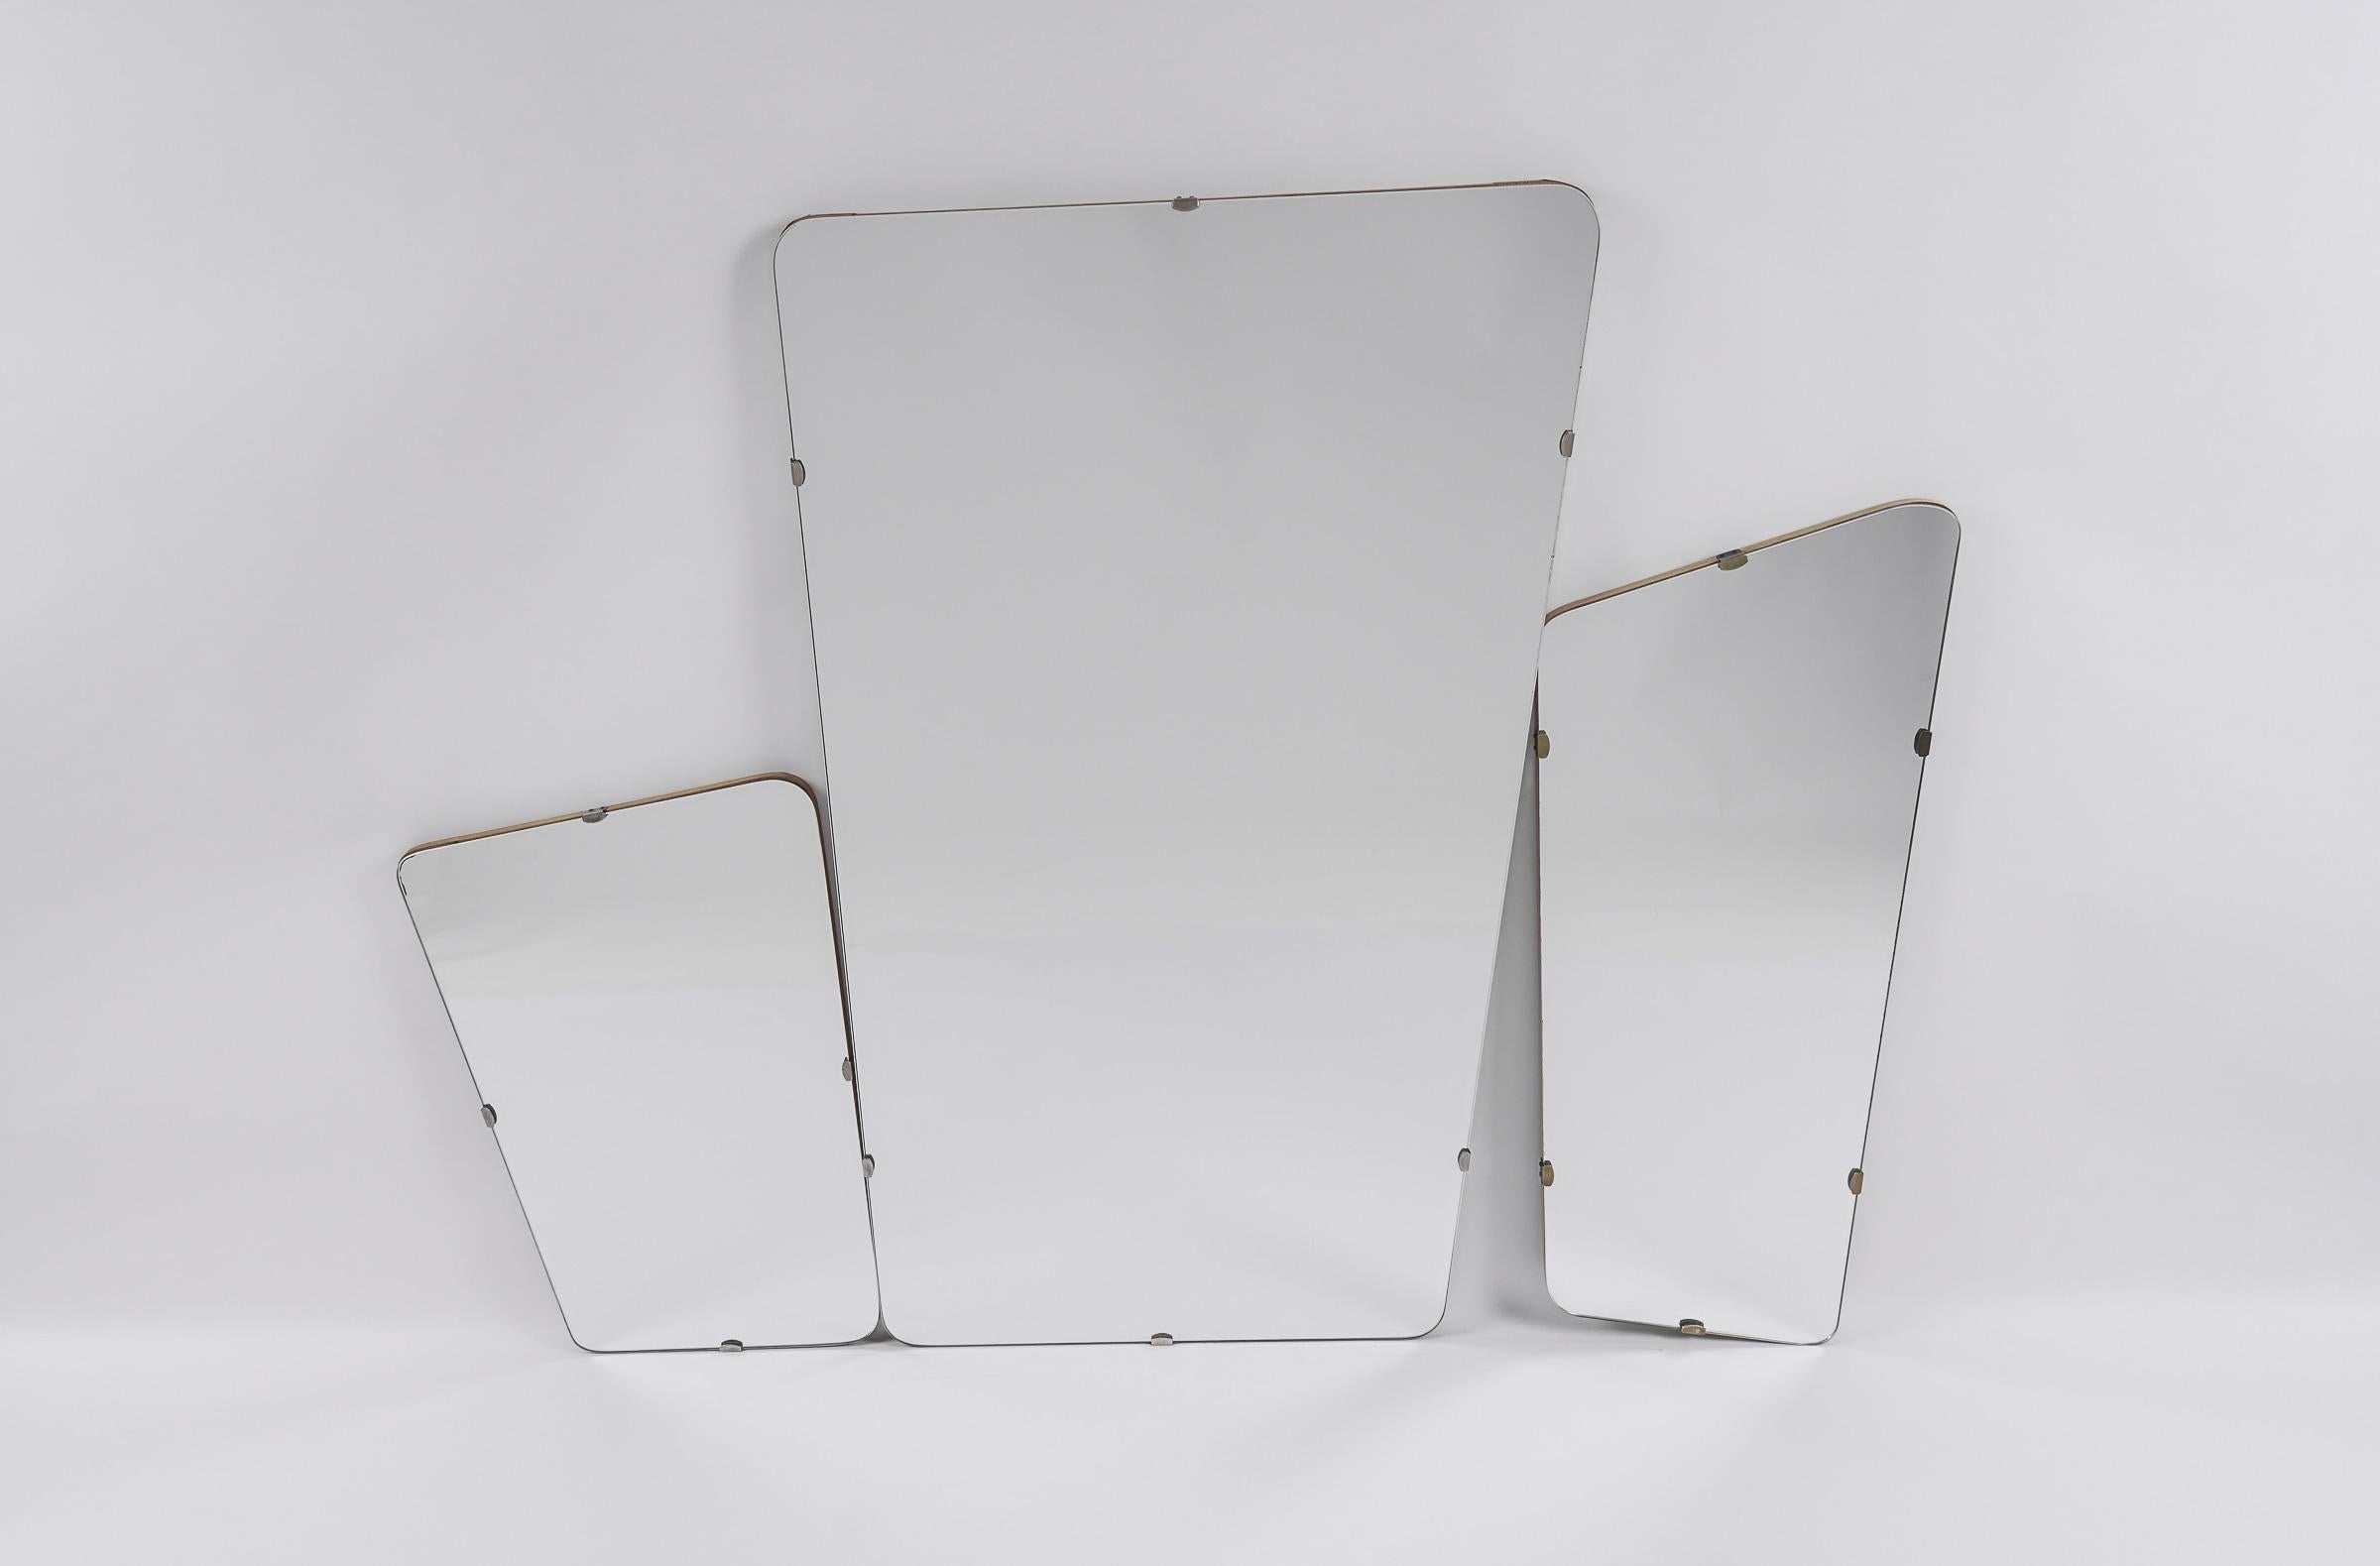 Asymmetrical and all from the same series with brass clips.

The smallest mirror: 61cm high, 40cm wide, 2 cm deep.

The middle mirror: 72cm high, 35cm wide, 2 cm deep.

The biggest mirror: 111cm high, 68cm wide, 2.5 cm deep.